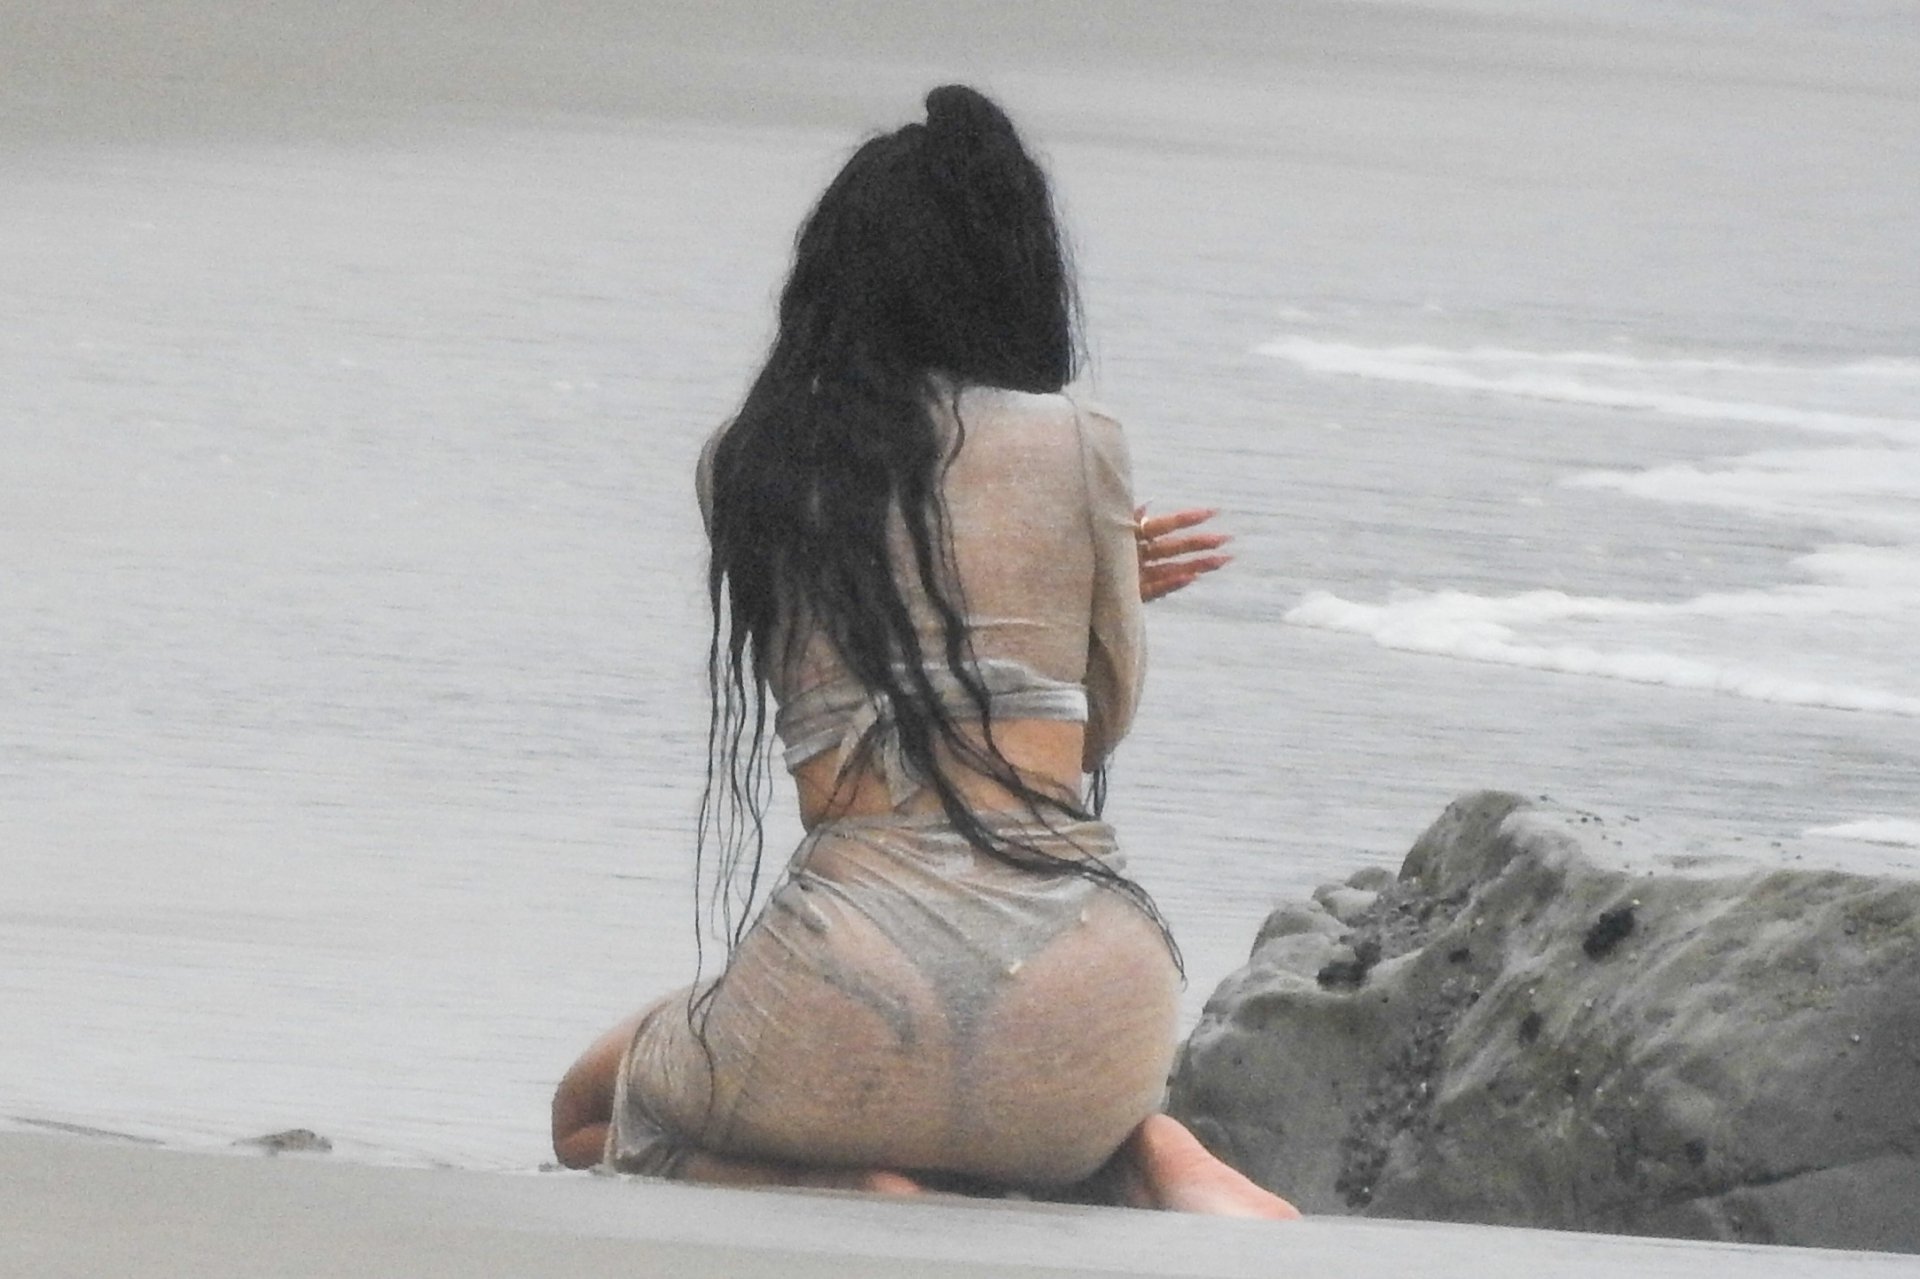 Kylie Jenner - Sexy Big Ass at a Photoshoot in Malibu. 